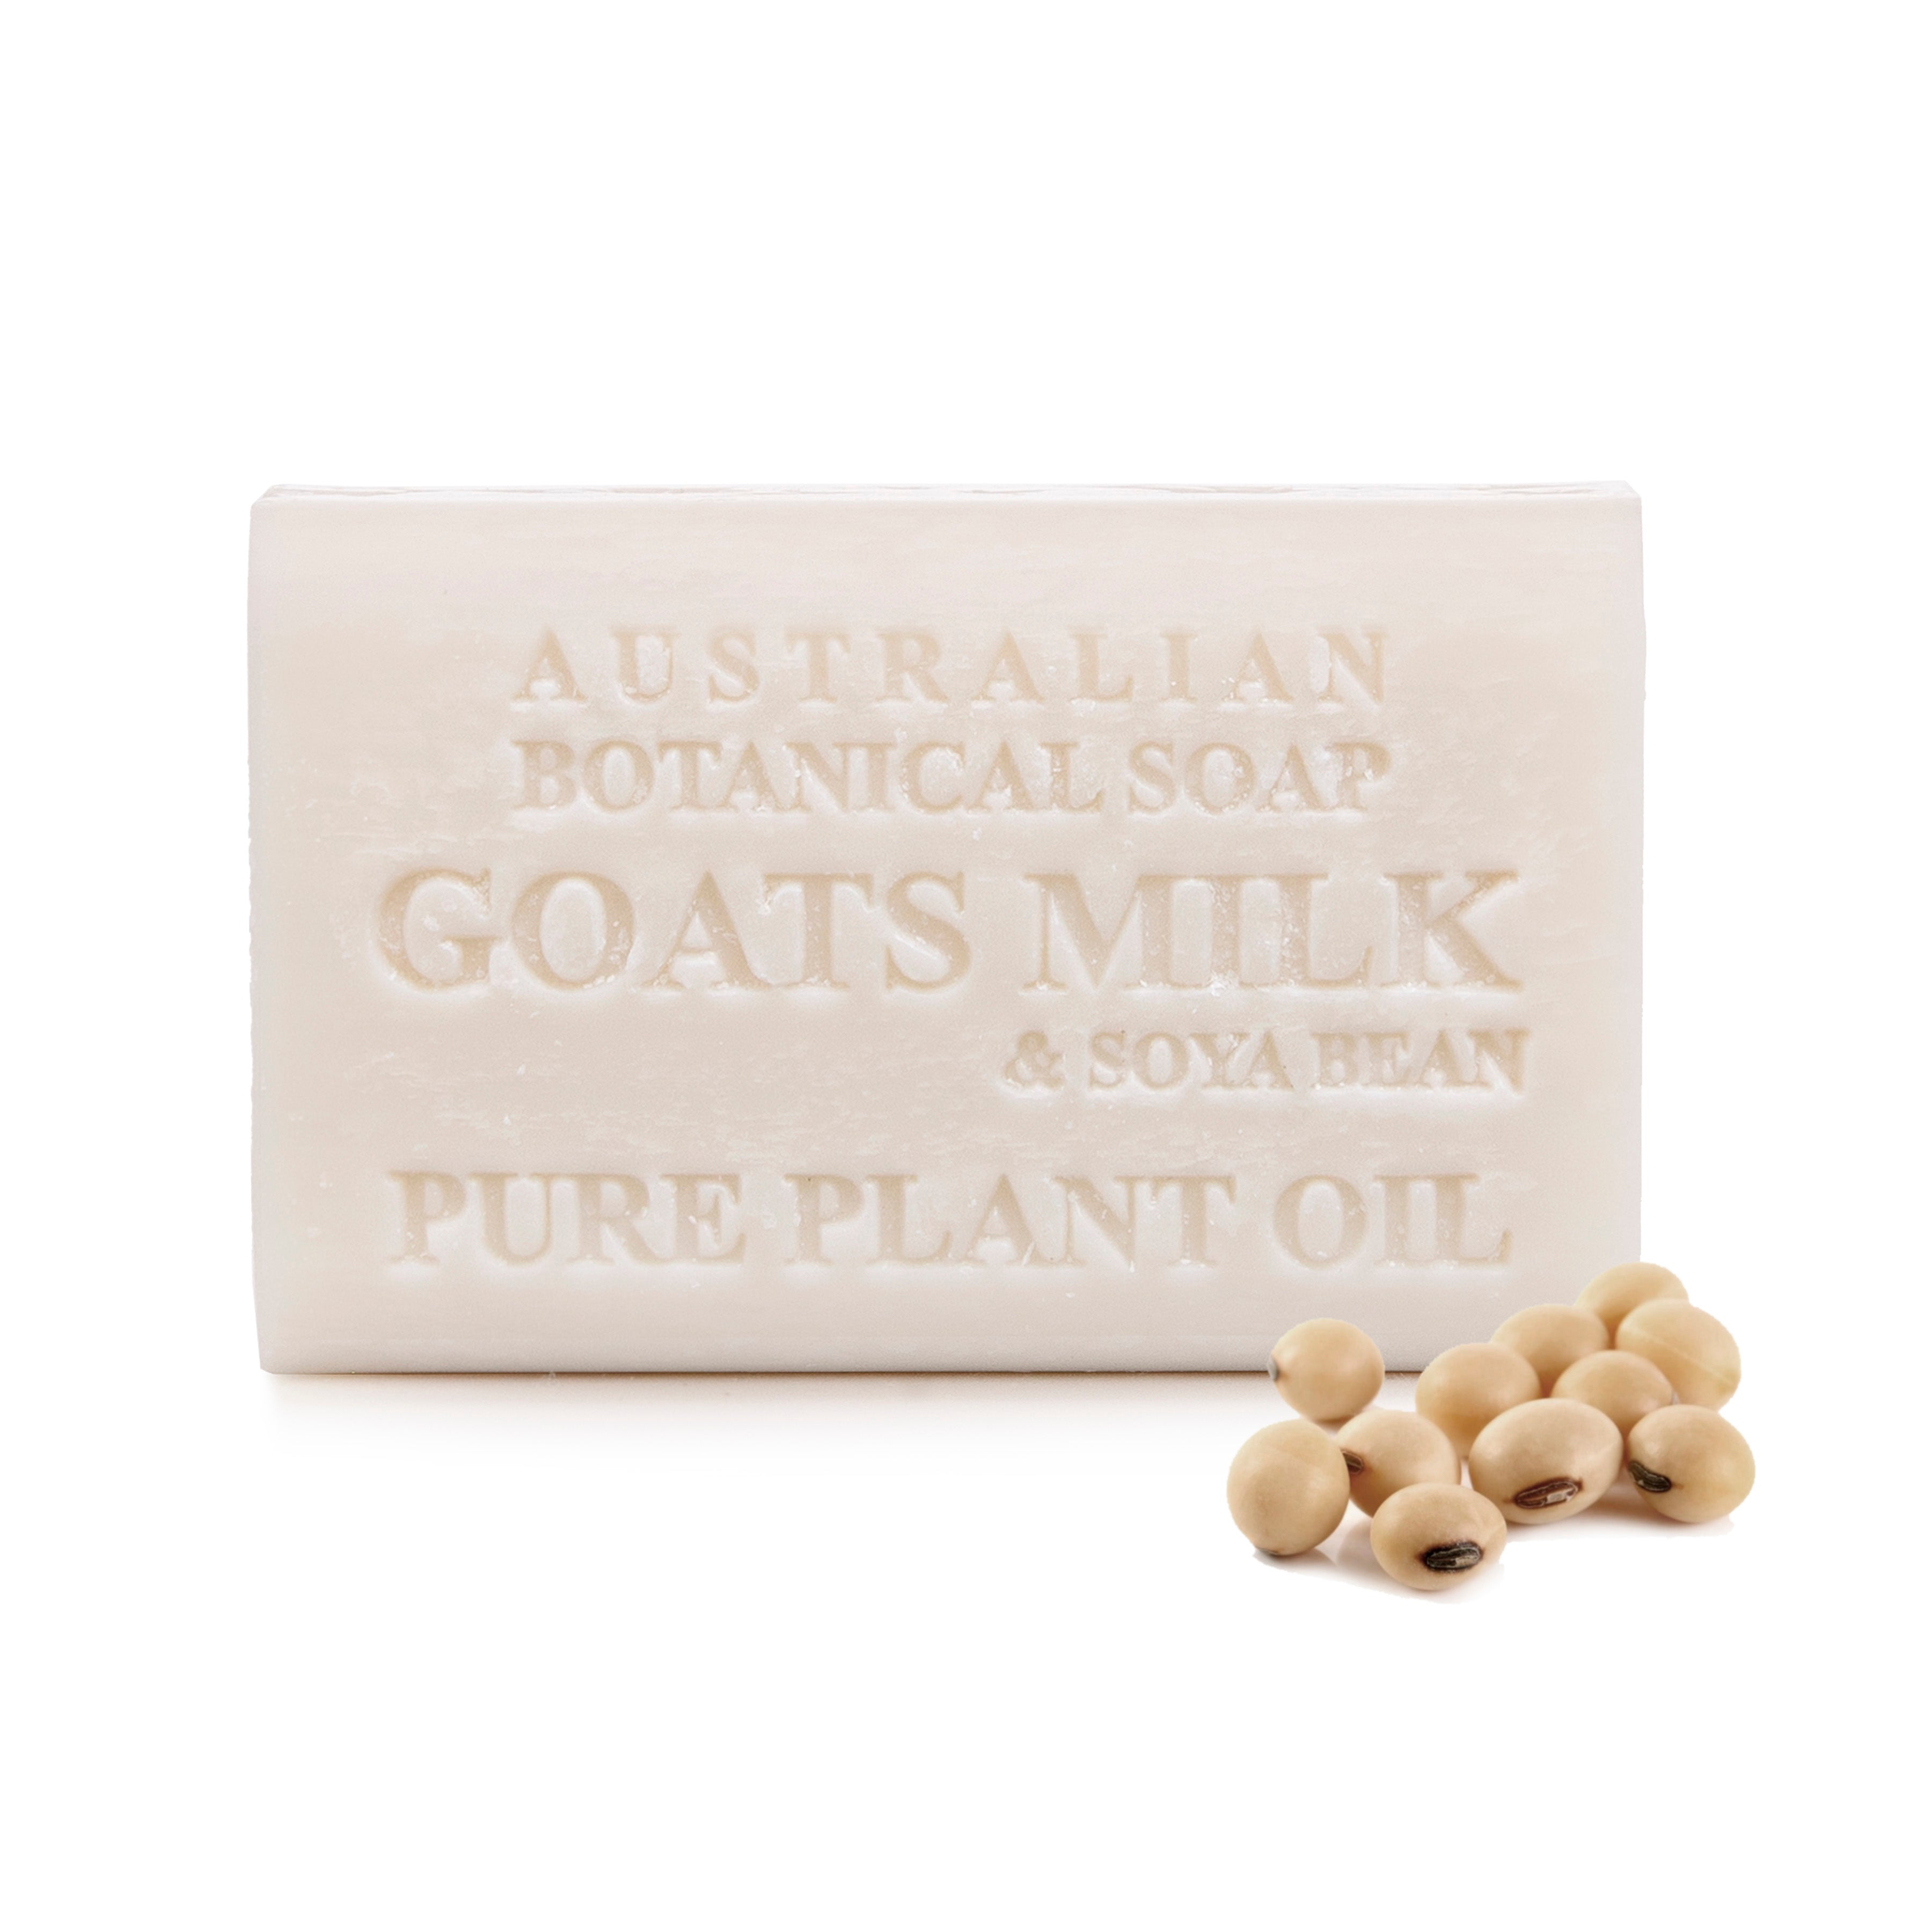 Skin Said Yes Goat Milk Soap Base - Experience the Unmatchable